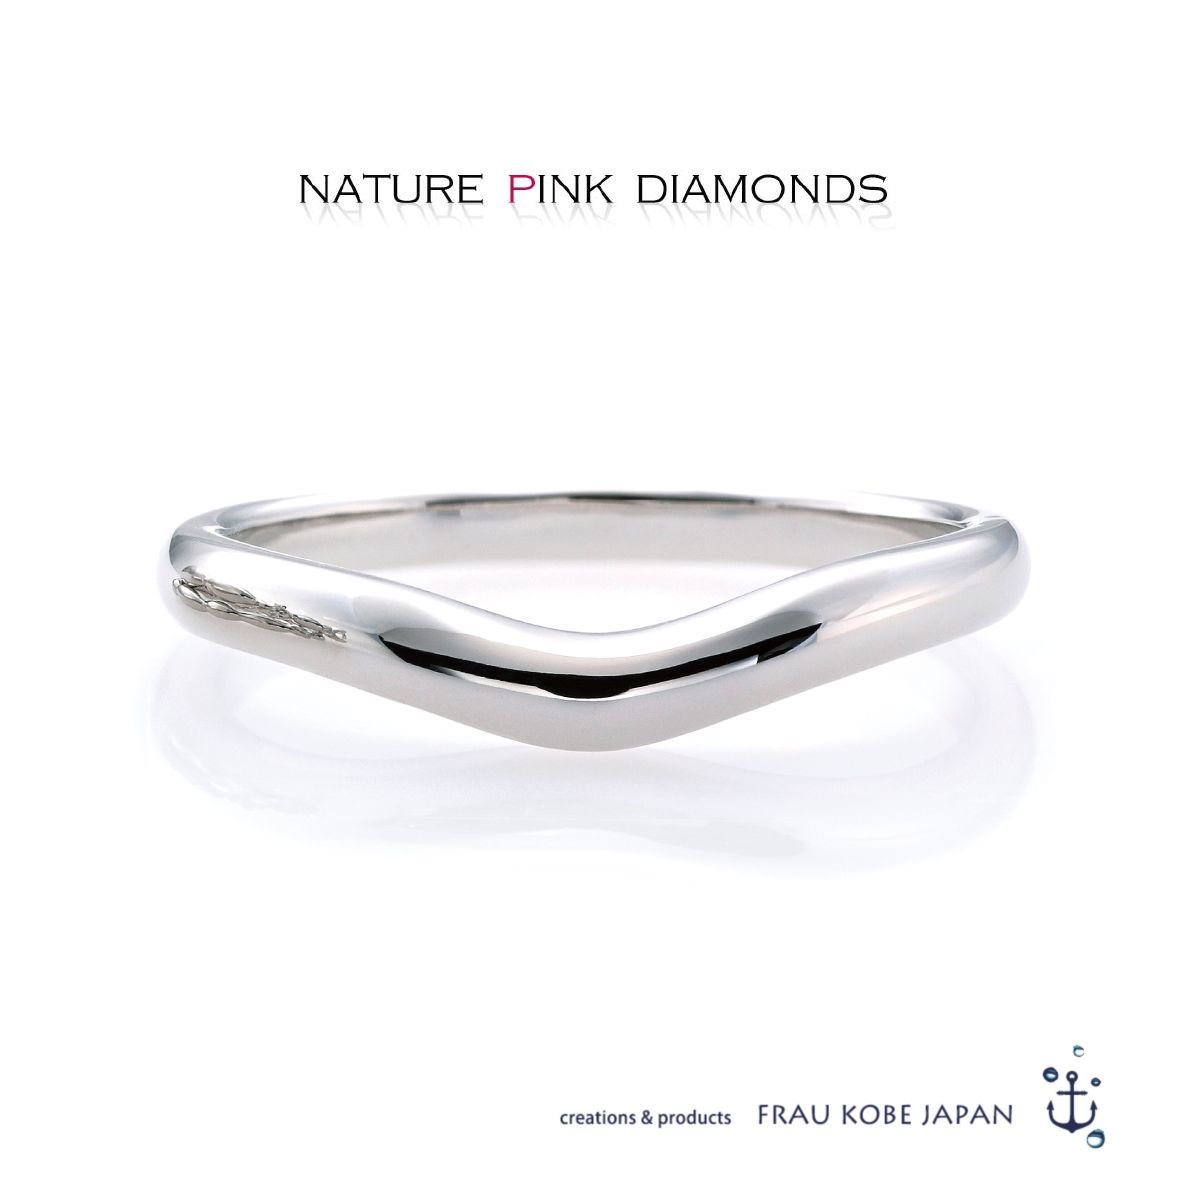 <img class='new_mark_img1' src='https://img.shop-pro.jp/img/new/icons30.gif' style='border:none;display:inline;margin:0px;padding:0px;width:auto;' />「NATURE PINK DIAMONDS -V curve- 」プレーンタイプマリッジリング